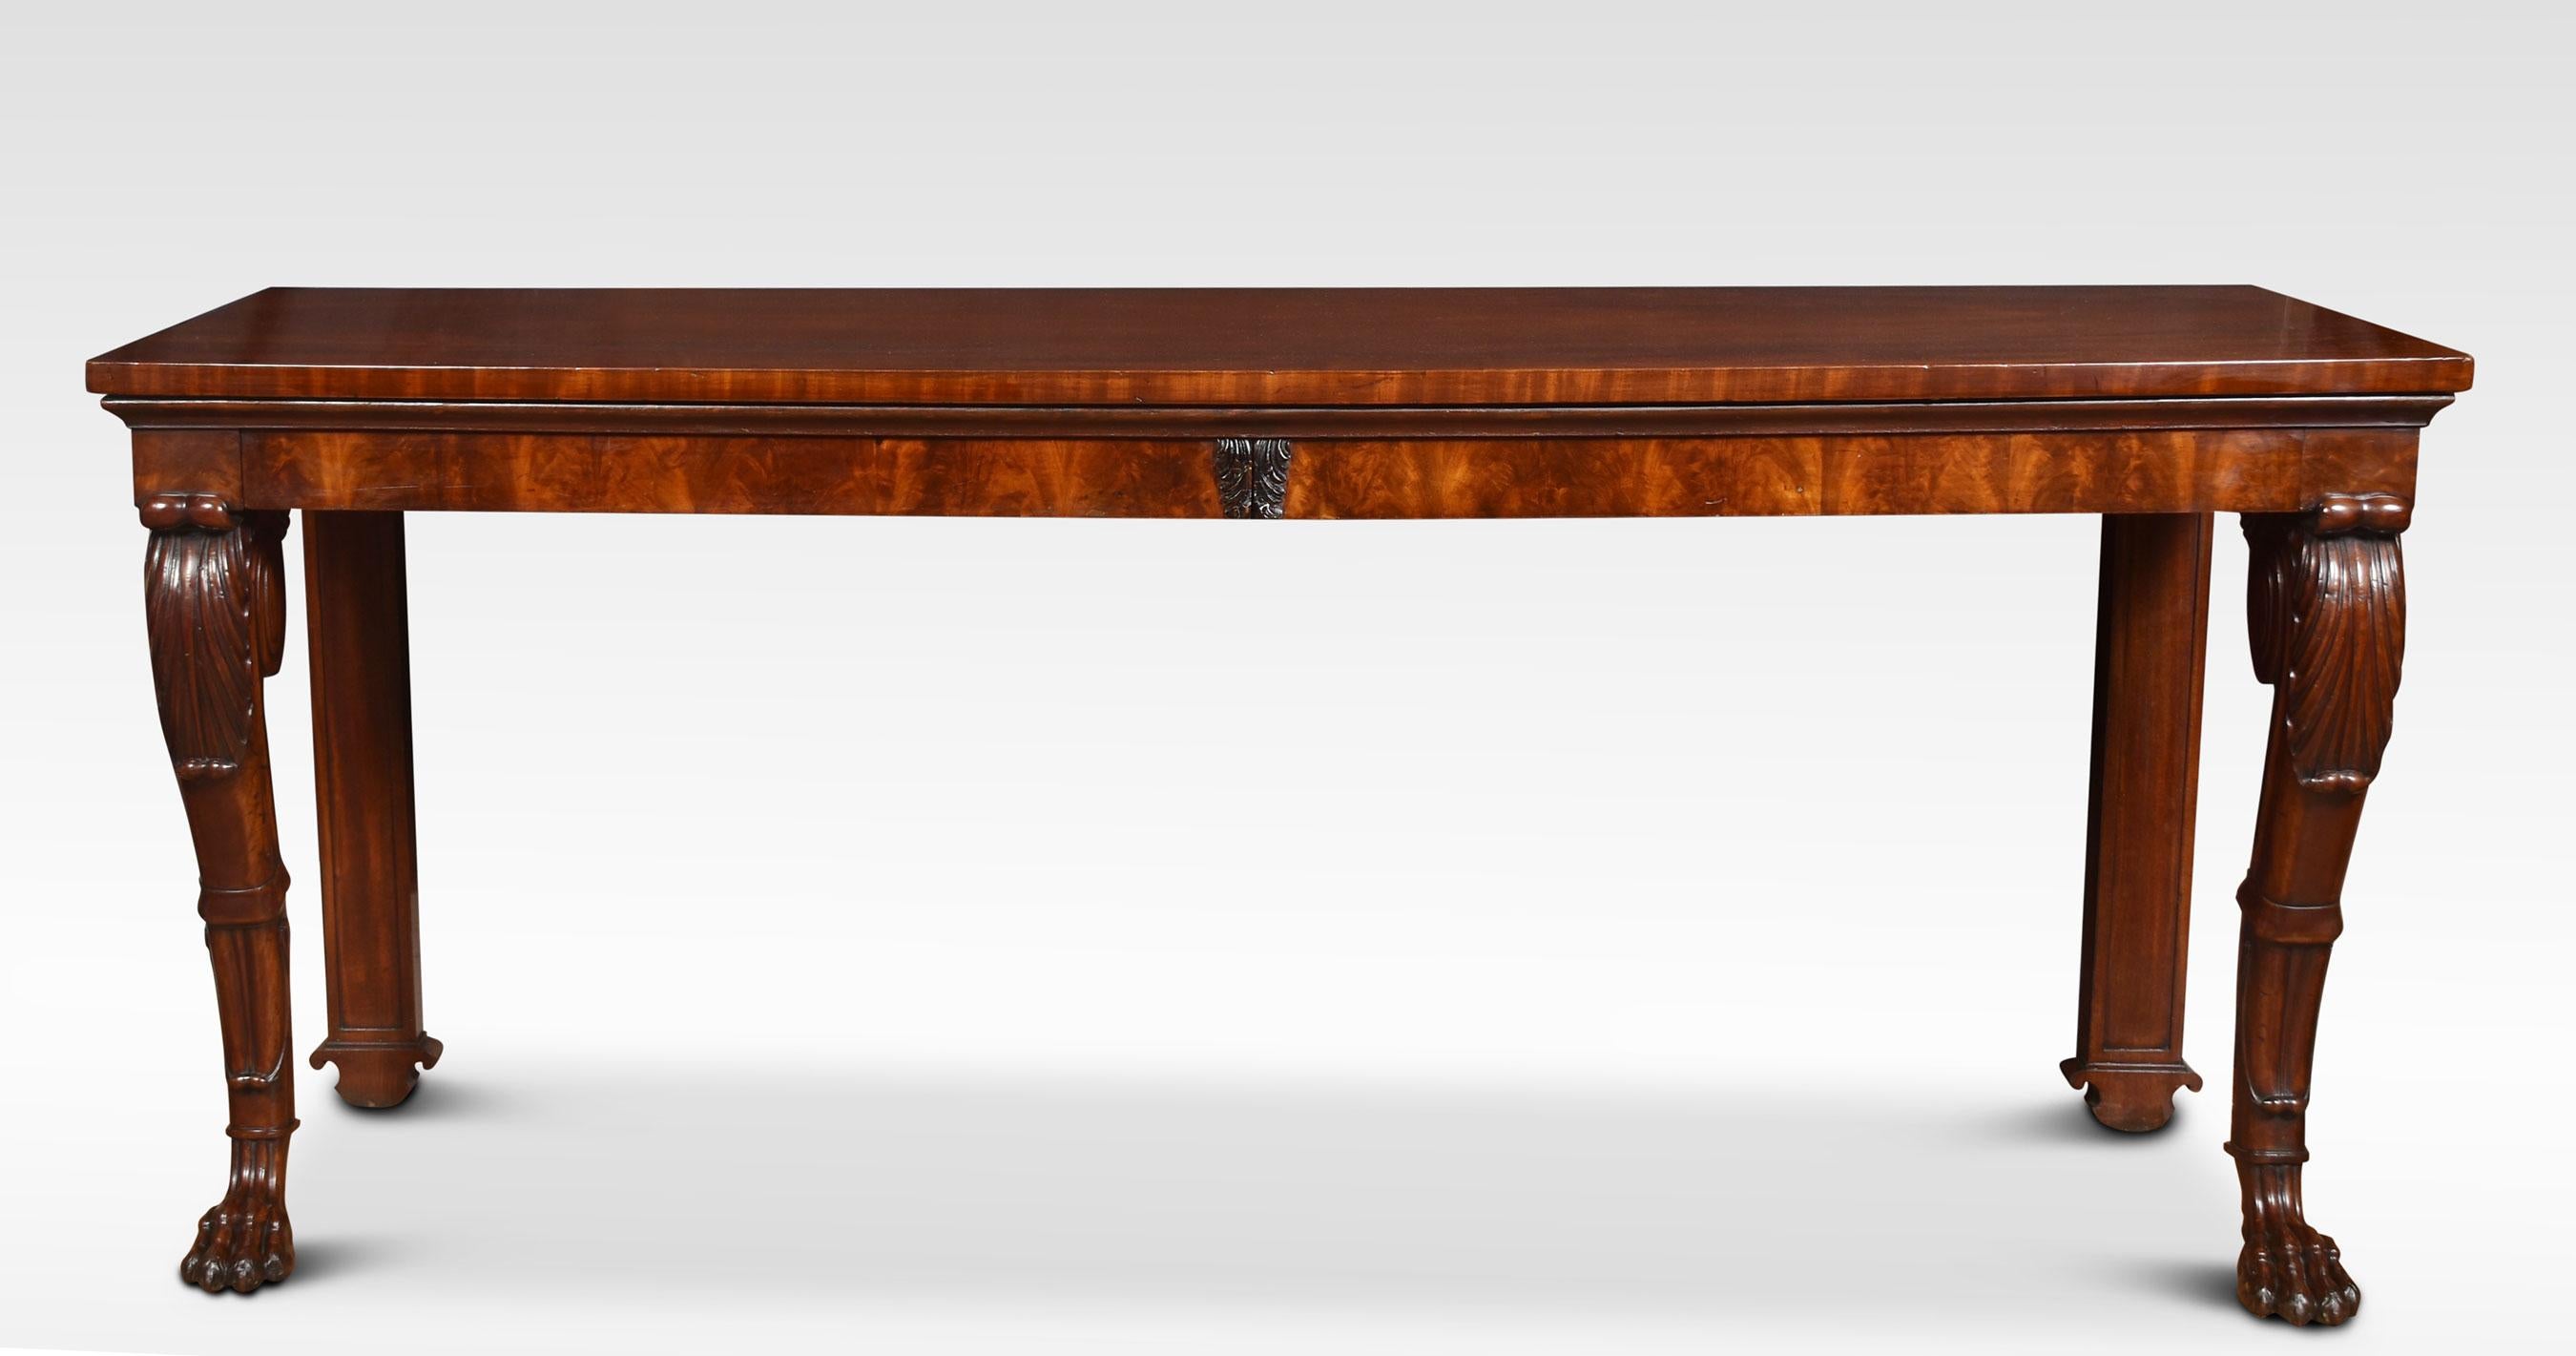 Regency mahogany serving table / console table, The large rectangular top with molded edge above a frieze fitted with two long drawers. All raised up on bold acanthus carved scrolled front legs with paw feet.
Dimensions
Height 36 Inches
Width 84